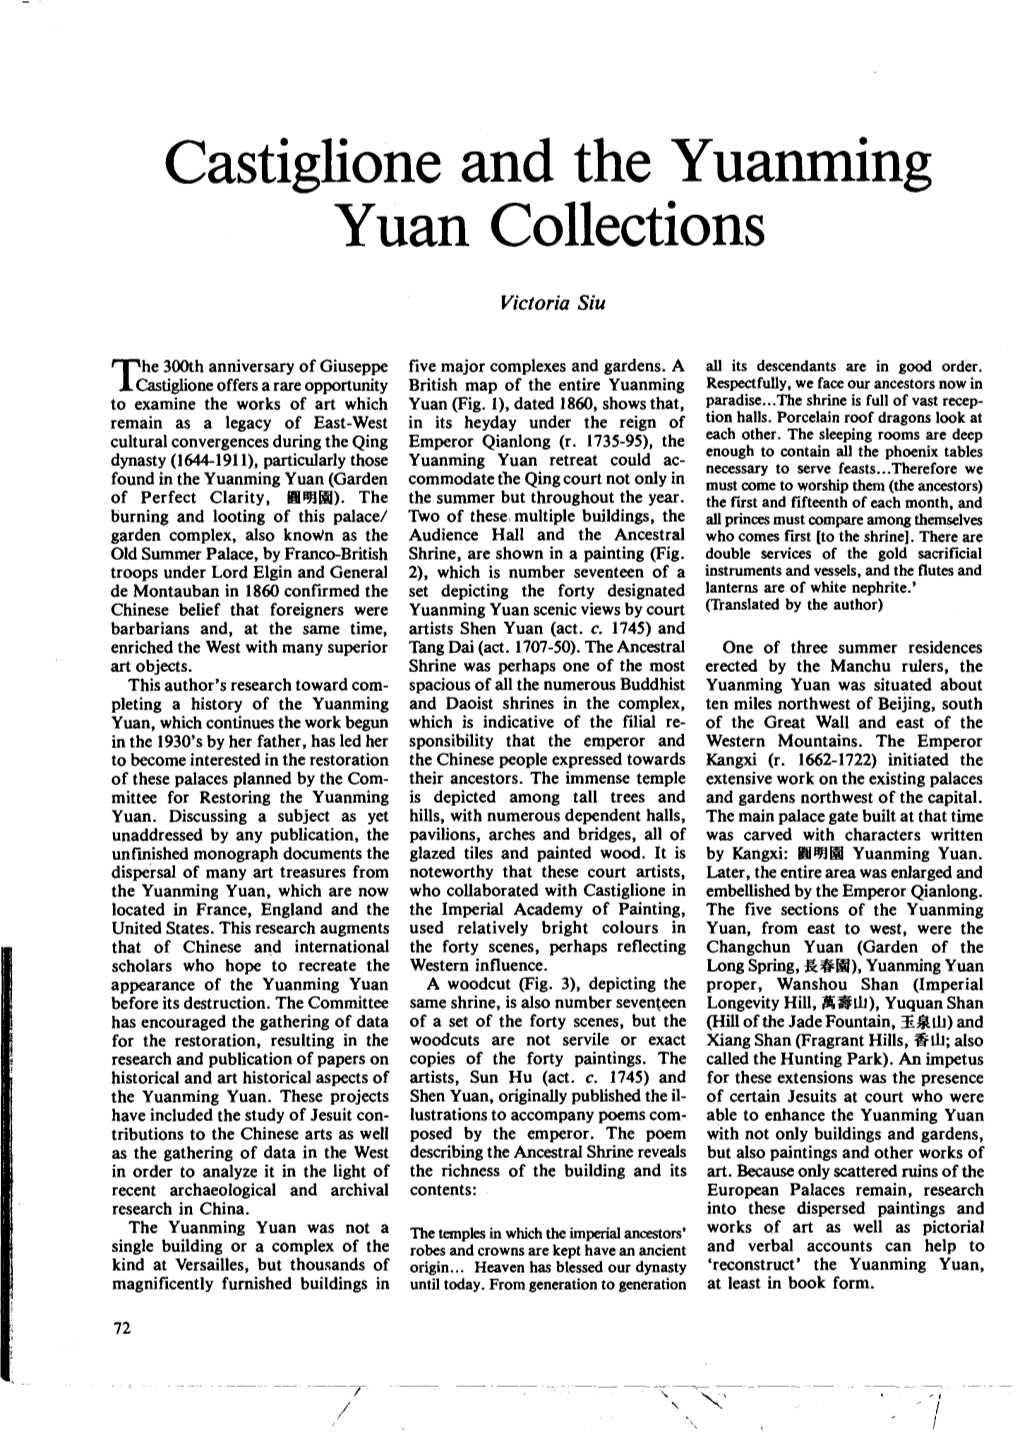 Castiglione and the Yuanrning Yuan Collections